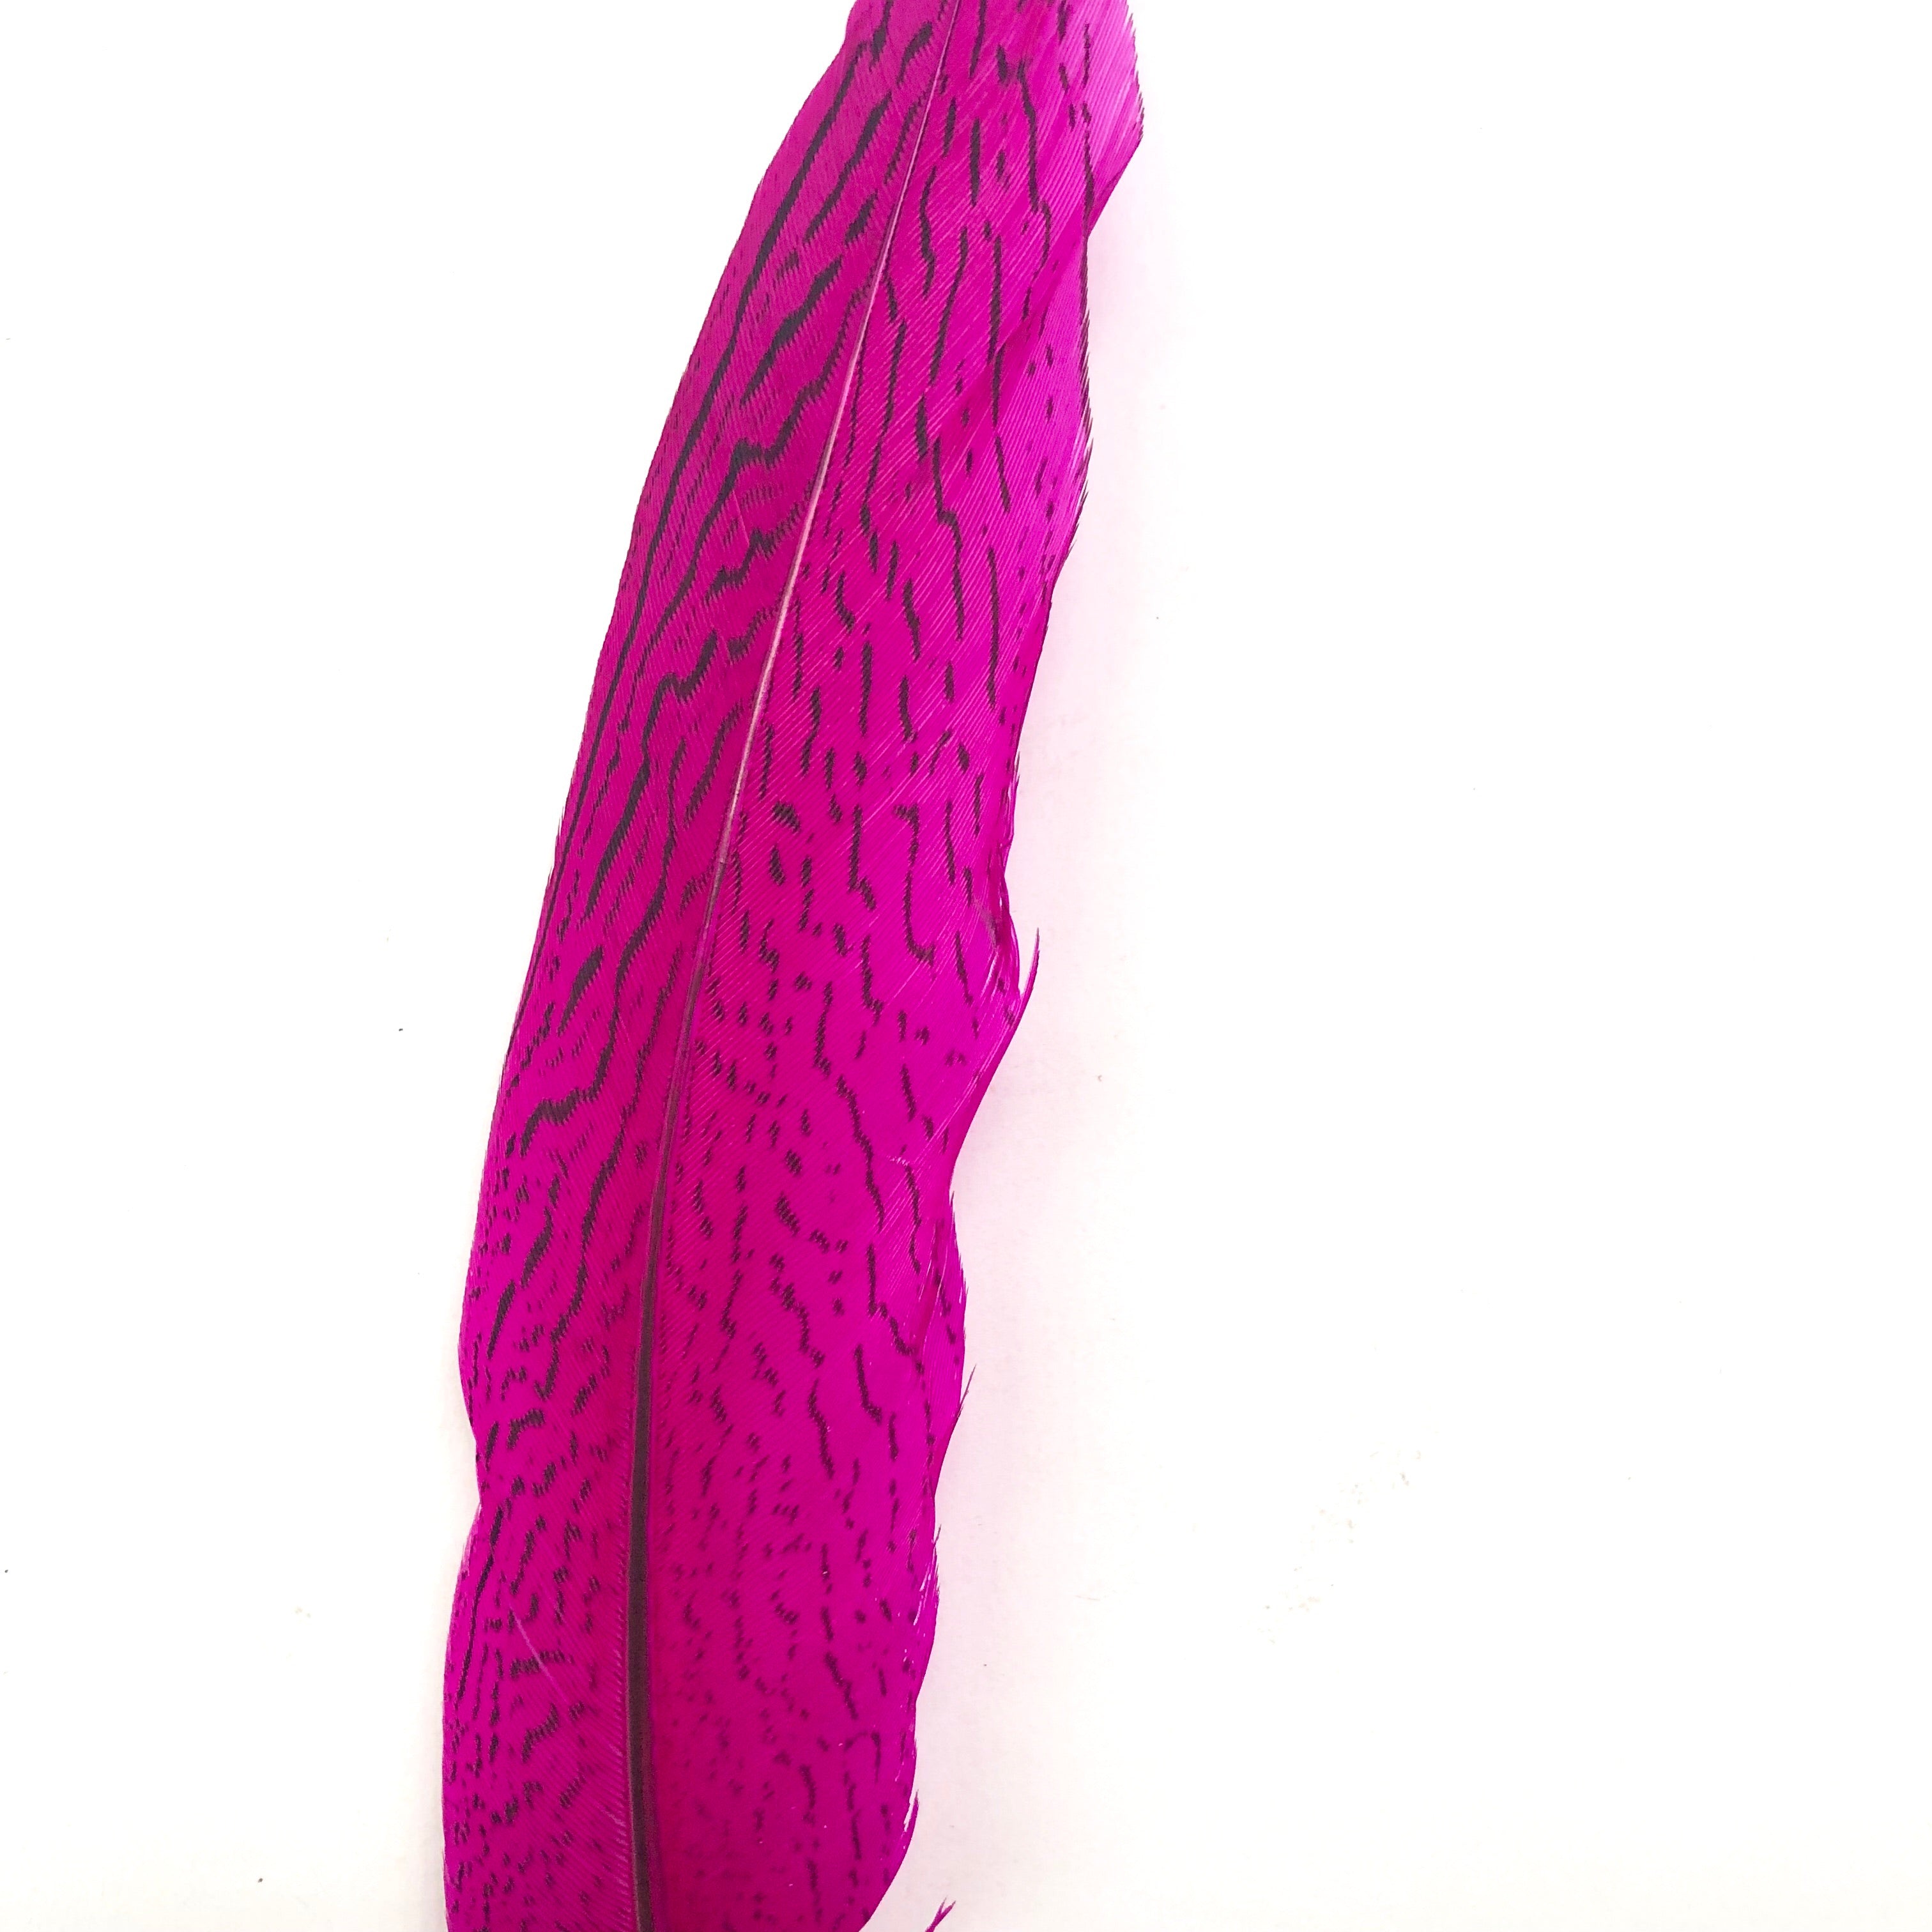 6" to 10" Silver Pheasant Tail Feather - Cerise